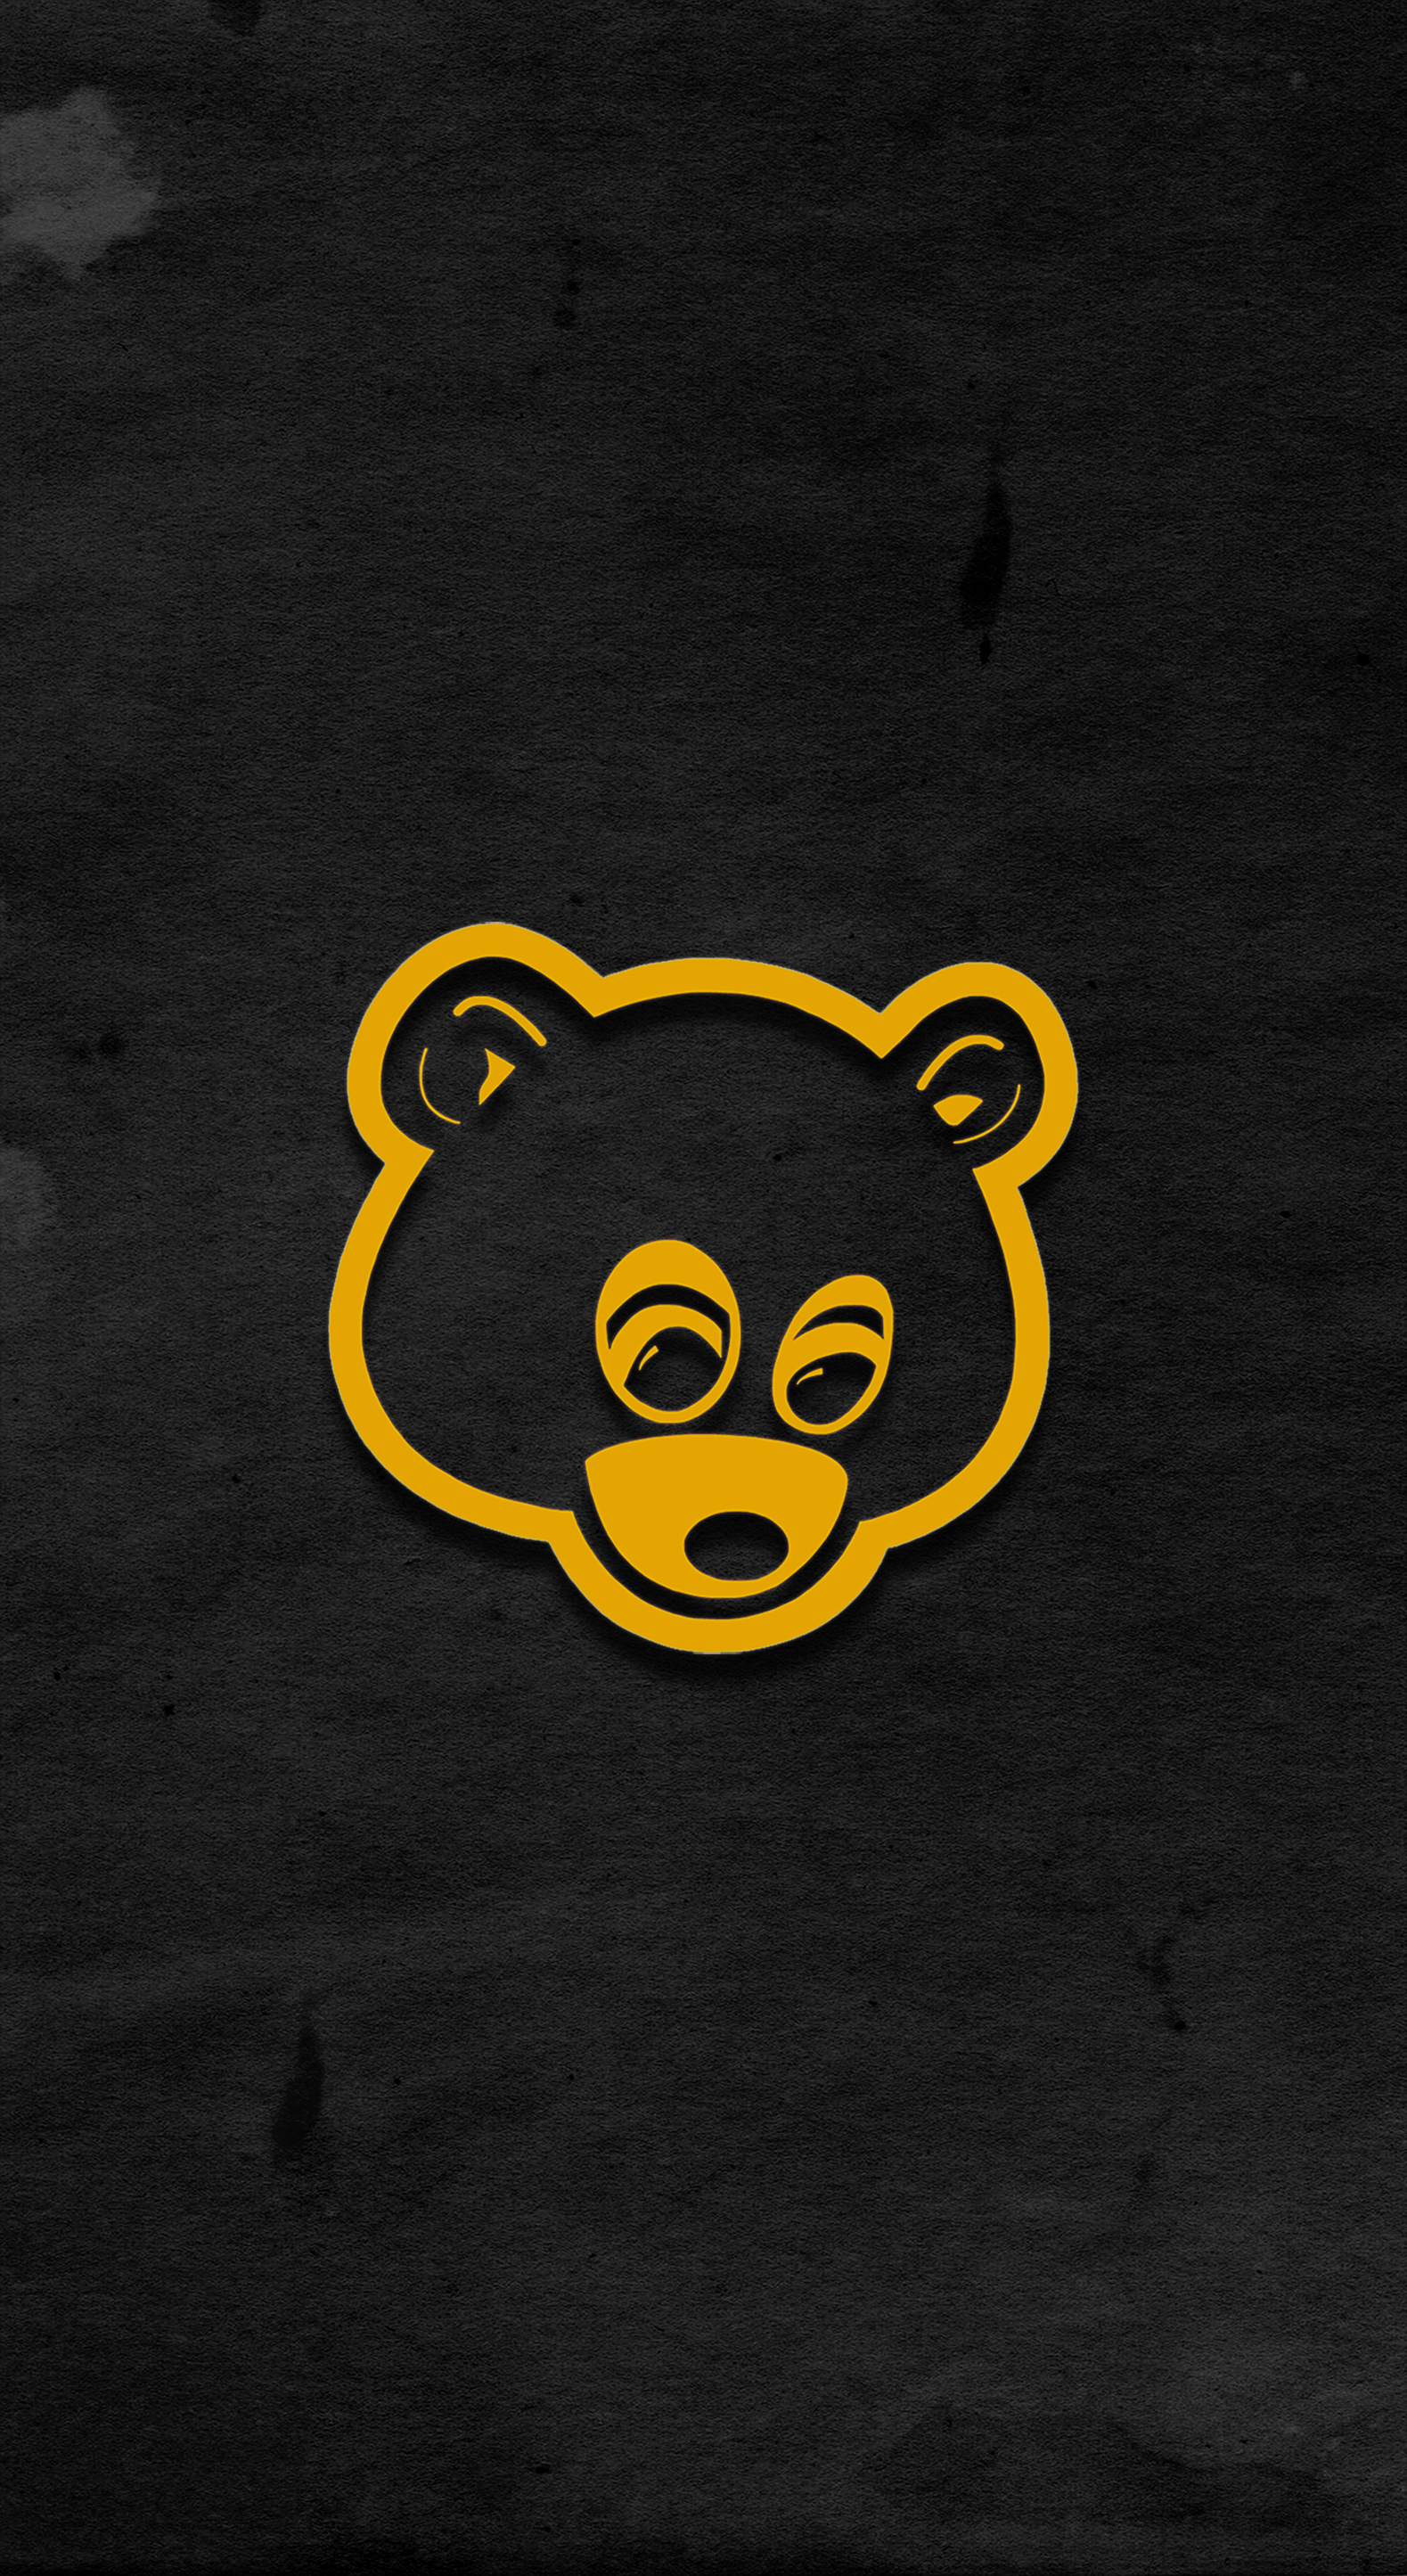 Dropout Bear wallpaper I threw together